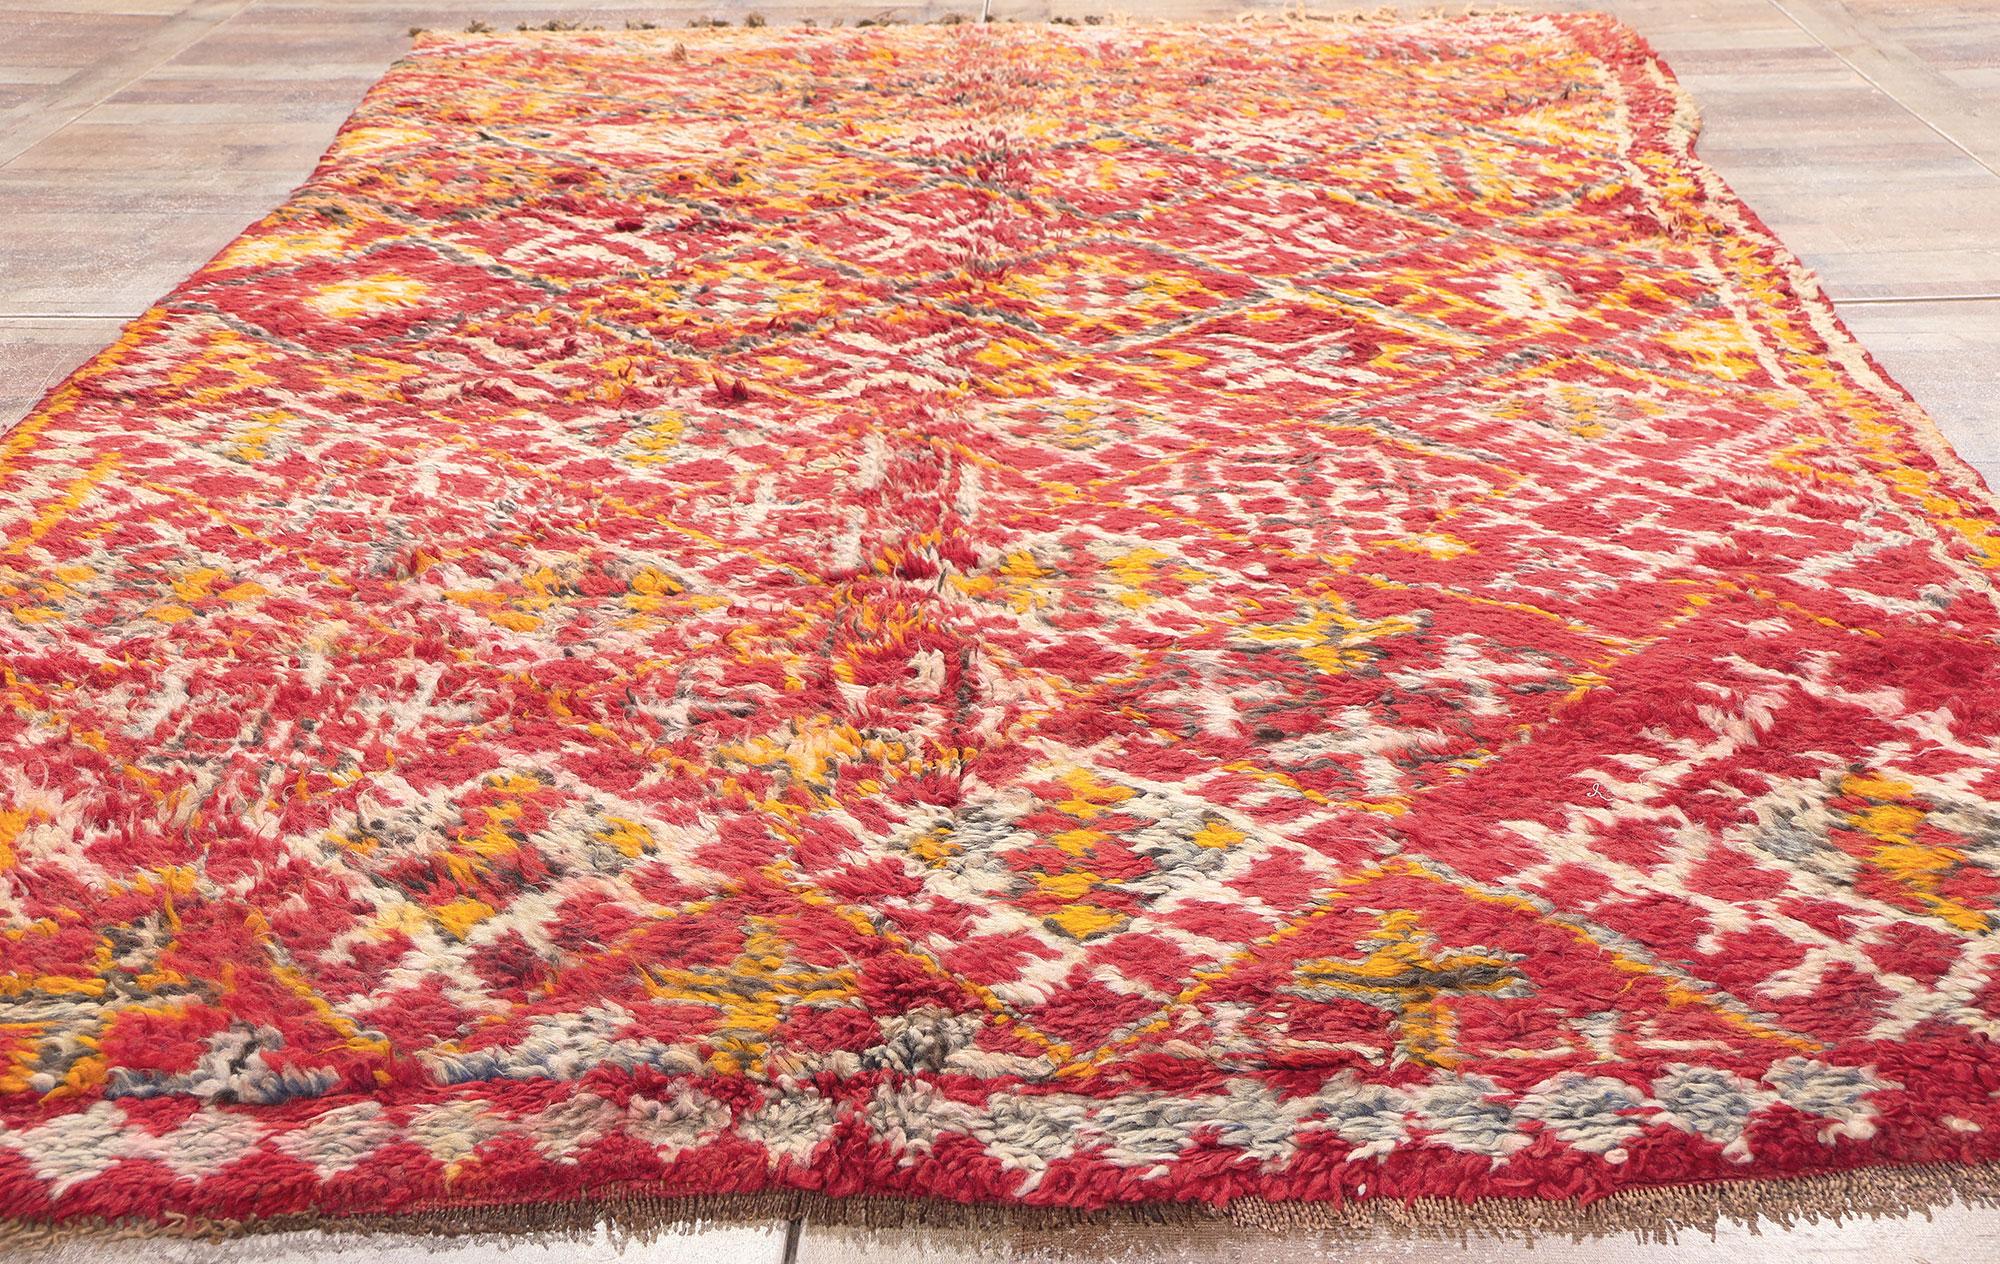 Wool Vintage Beni MGuild Moroccan Rug, Midcentury Modern Meets Spicy Boho Chic For Sale